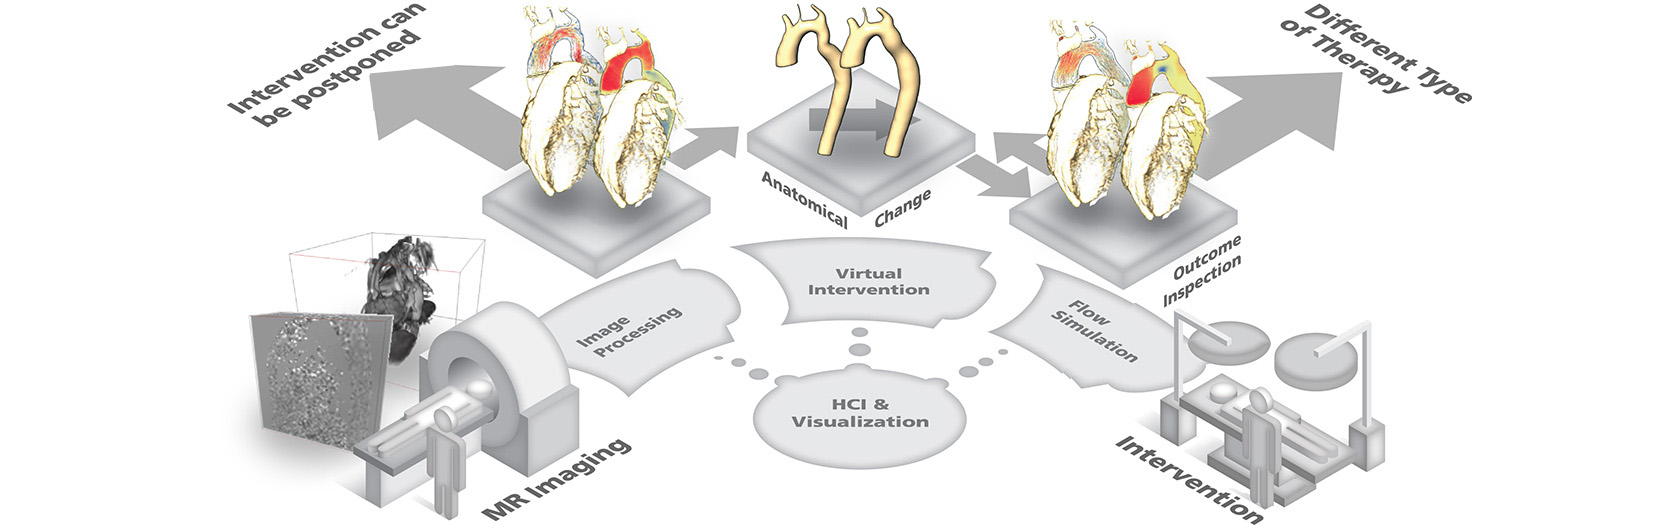 Integration of the image-based virtual interventions in the therapy planning of coarctation of the aorta.